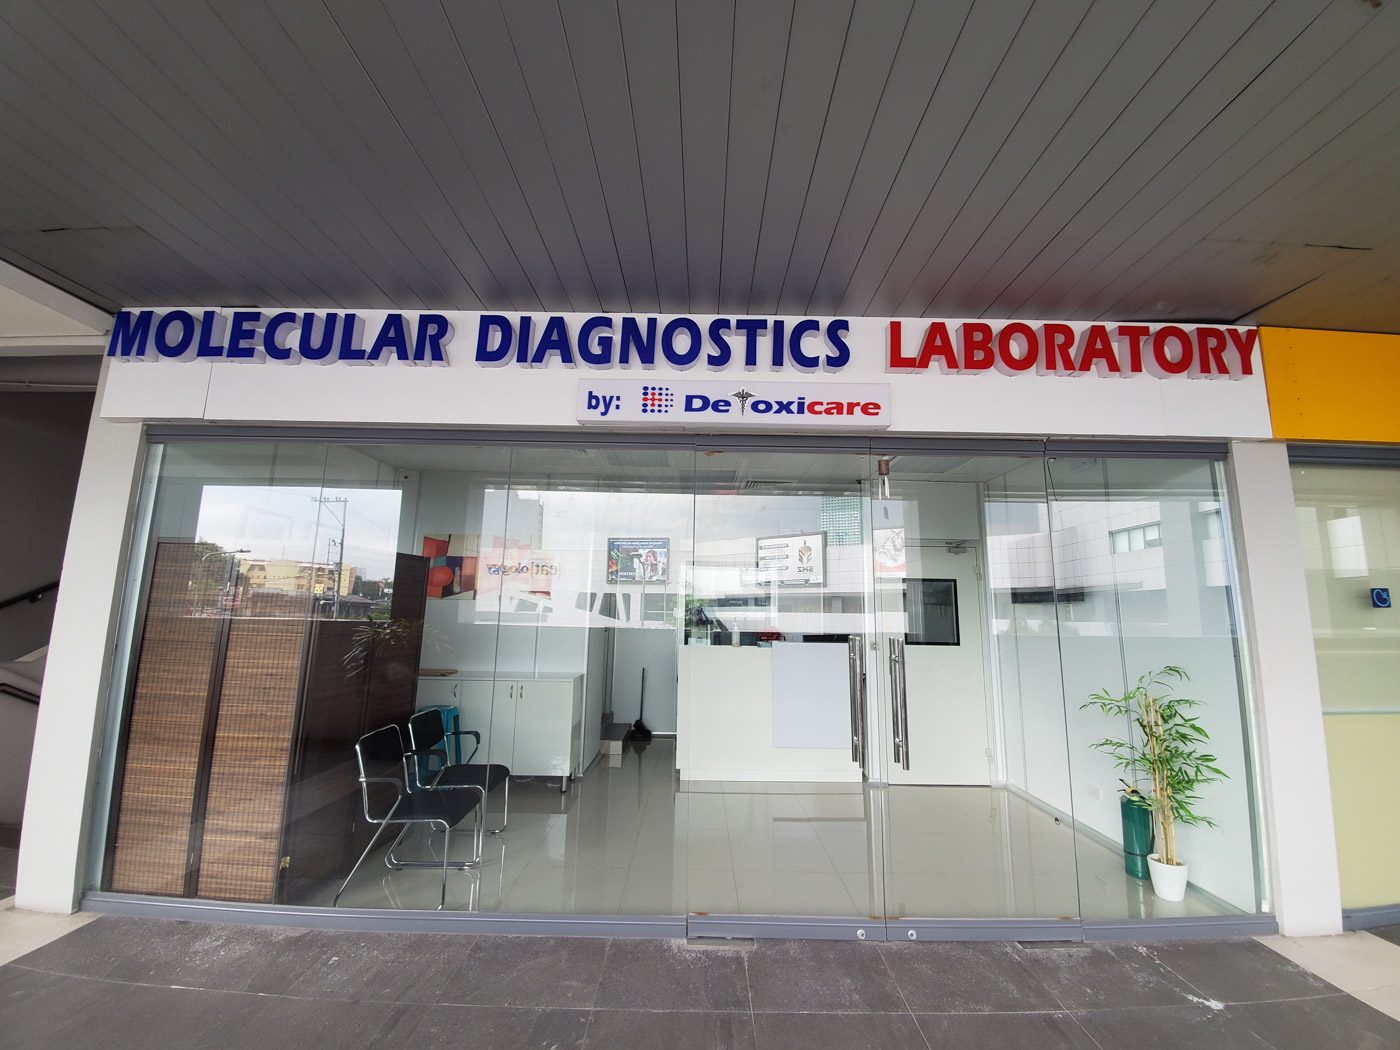 PRIVATE. Detoxicare Molecular Diagnostics Laboratory is the first stand-alone private COVID-19 testing lab in Mandaluyong. The lab opened last year to provide molecular diagnostics tests and was DOH-accredited for COVID-19 testing earlier this month. Photo courtesy of Detoxicare Molecular Diagnostics Laboratory 